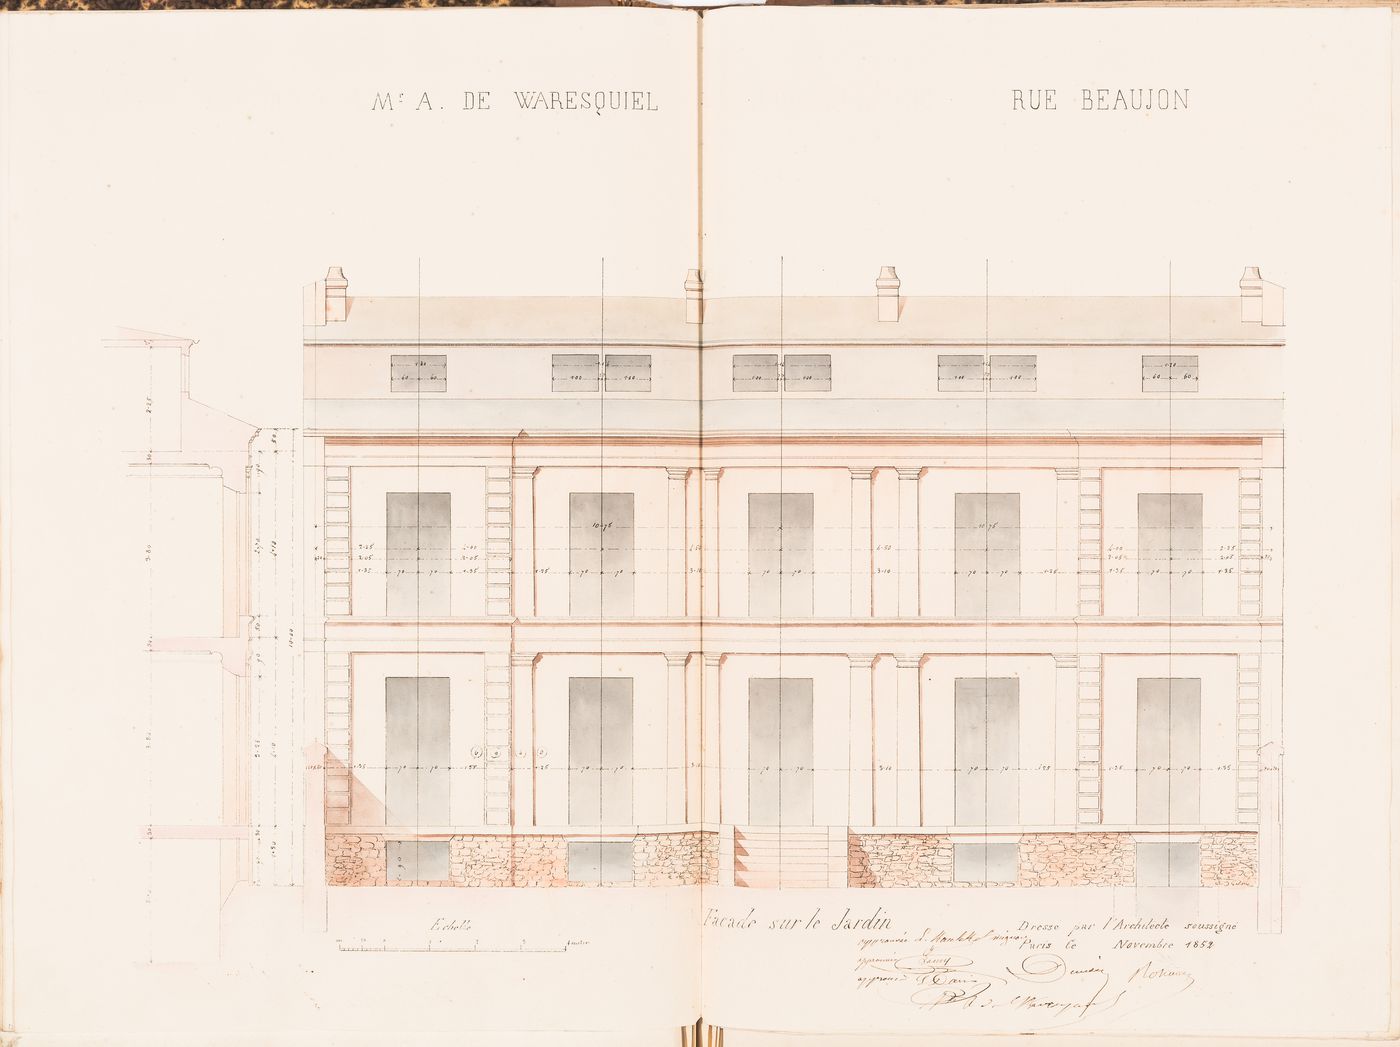 Contract drawing for a house for Monsieur A. Waresquiel, rue Beaujon, Paris: Elevation for the garden façade